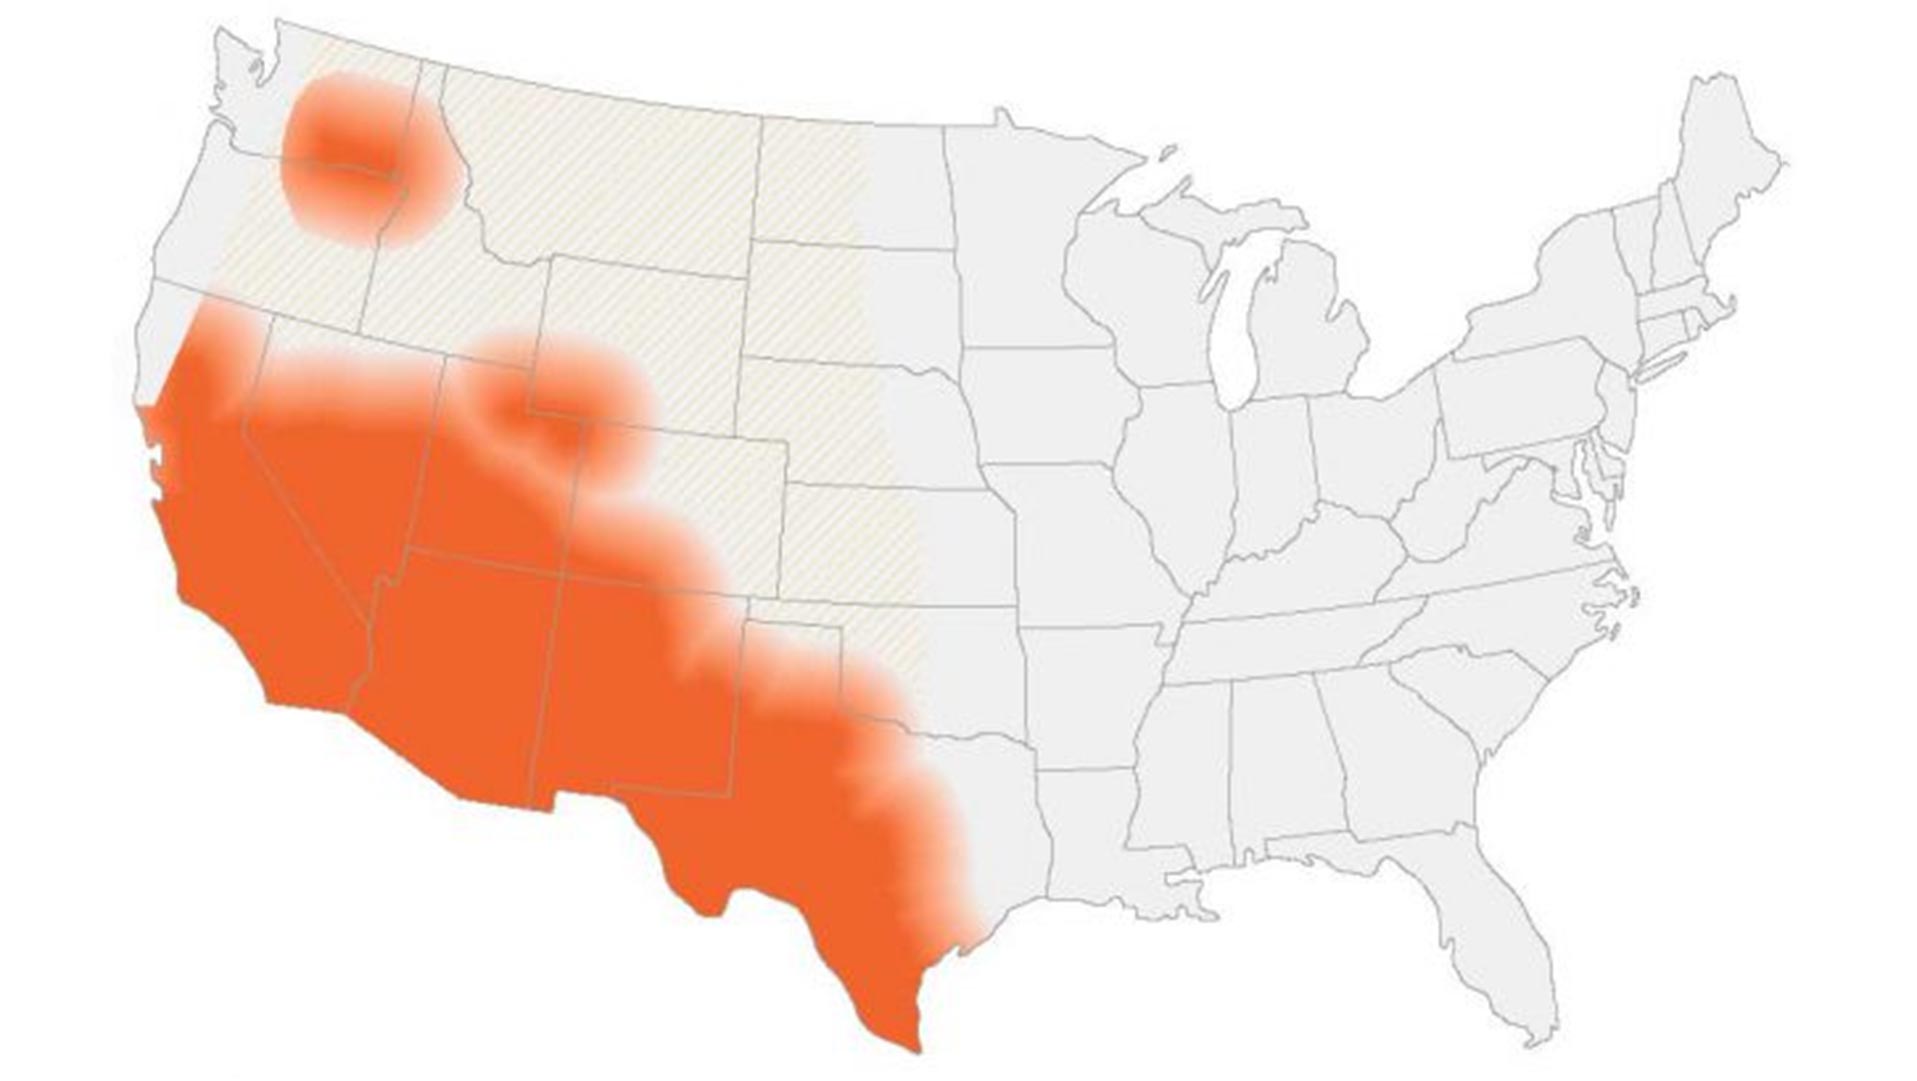 Current spread of valley fever cases in the United States.